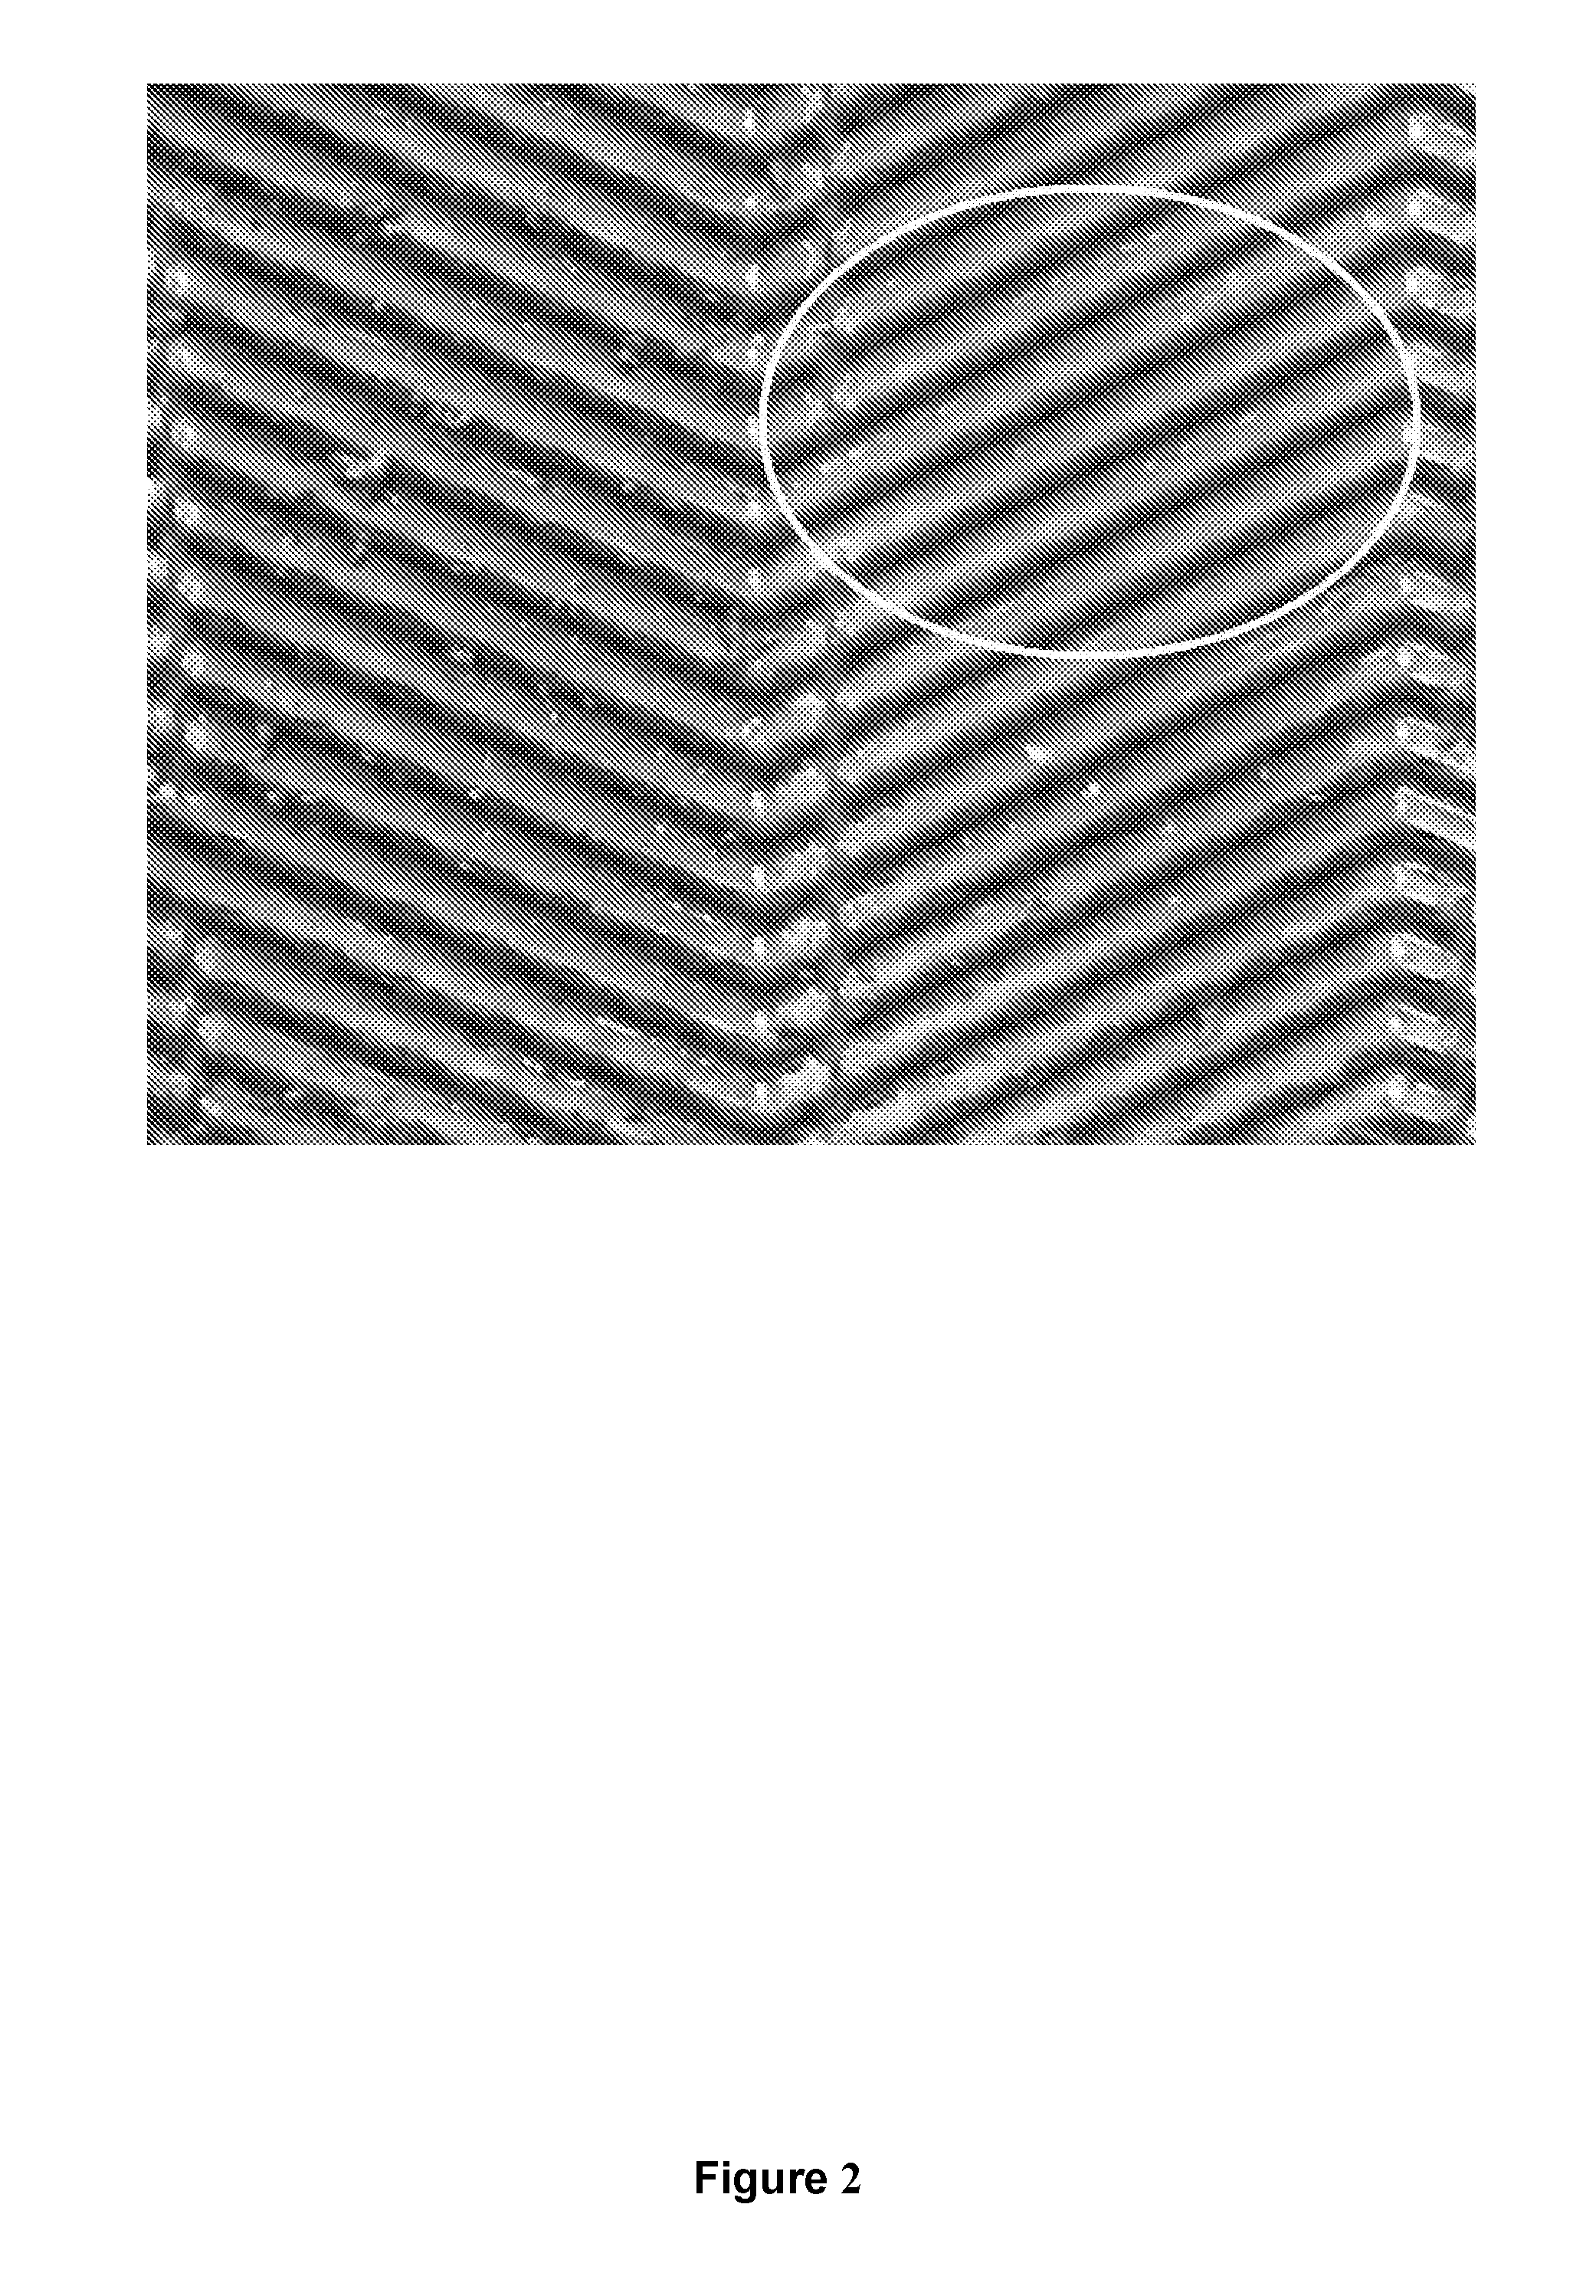 Repellent coating composition and coating, method for making and uses thereof